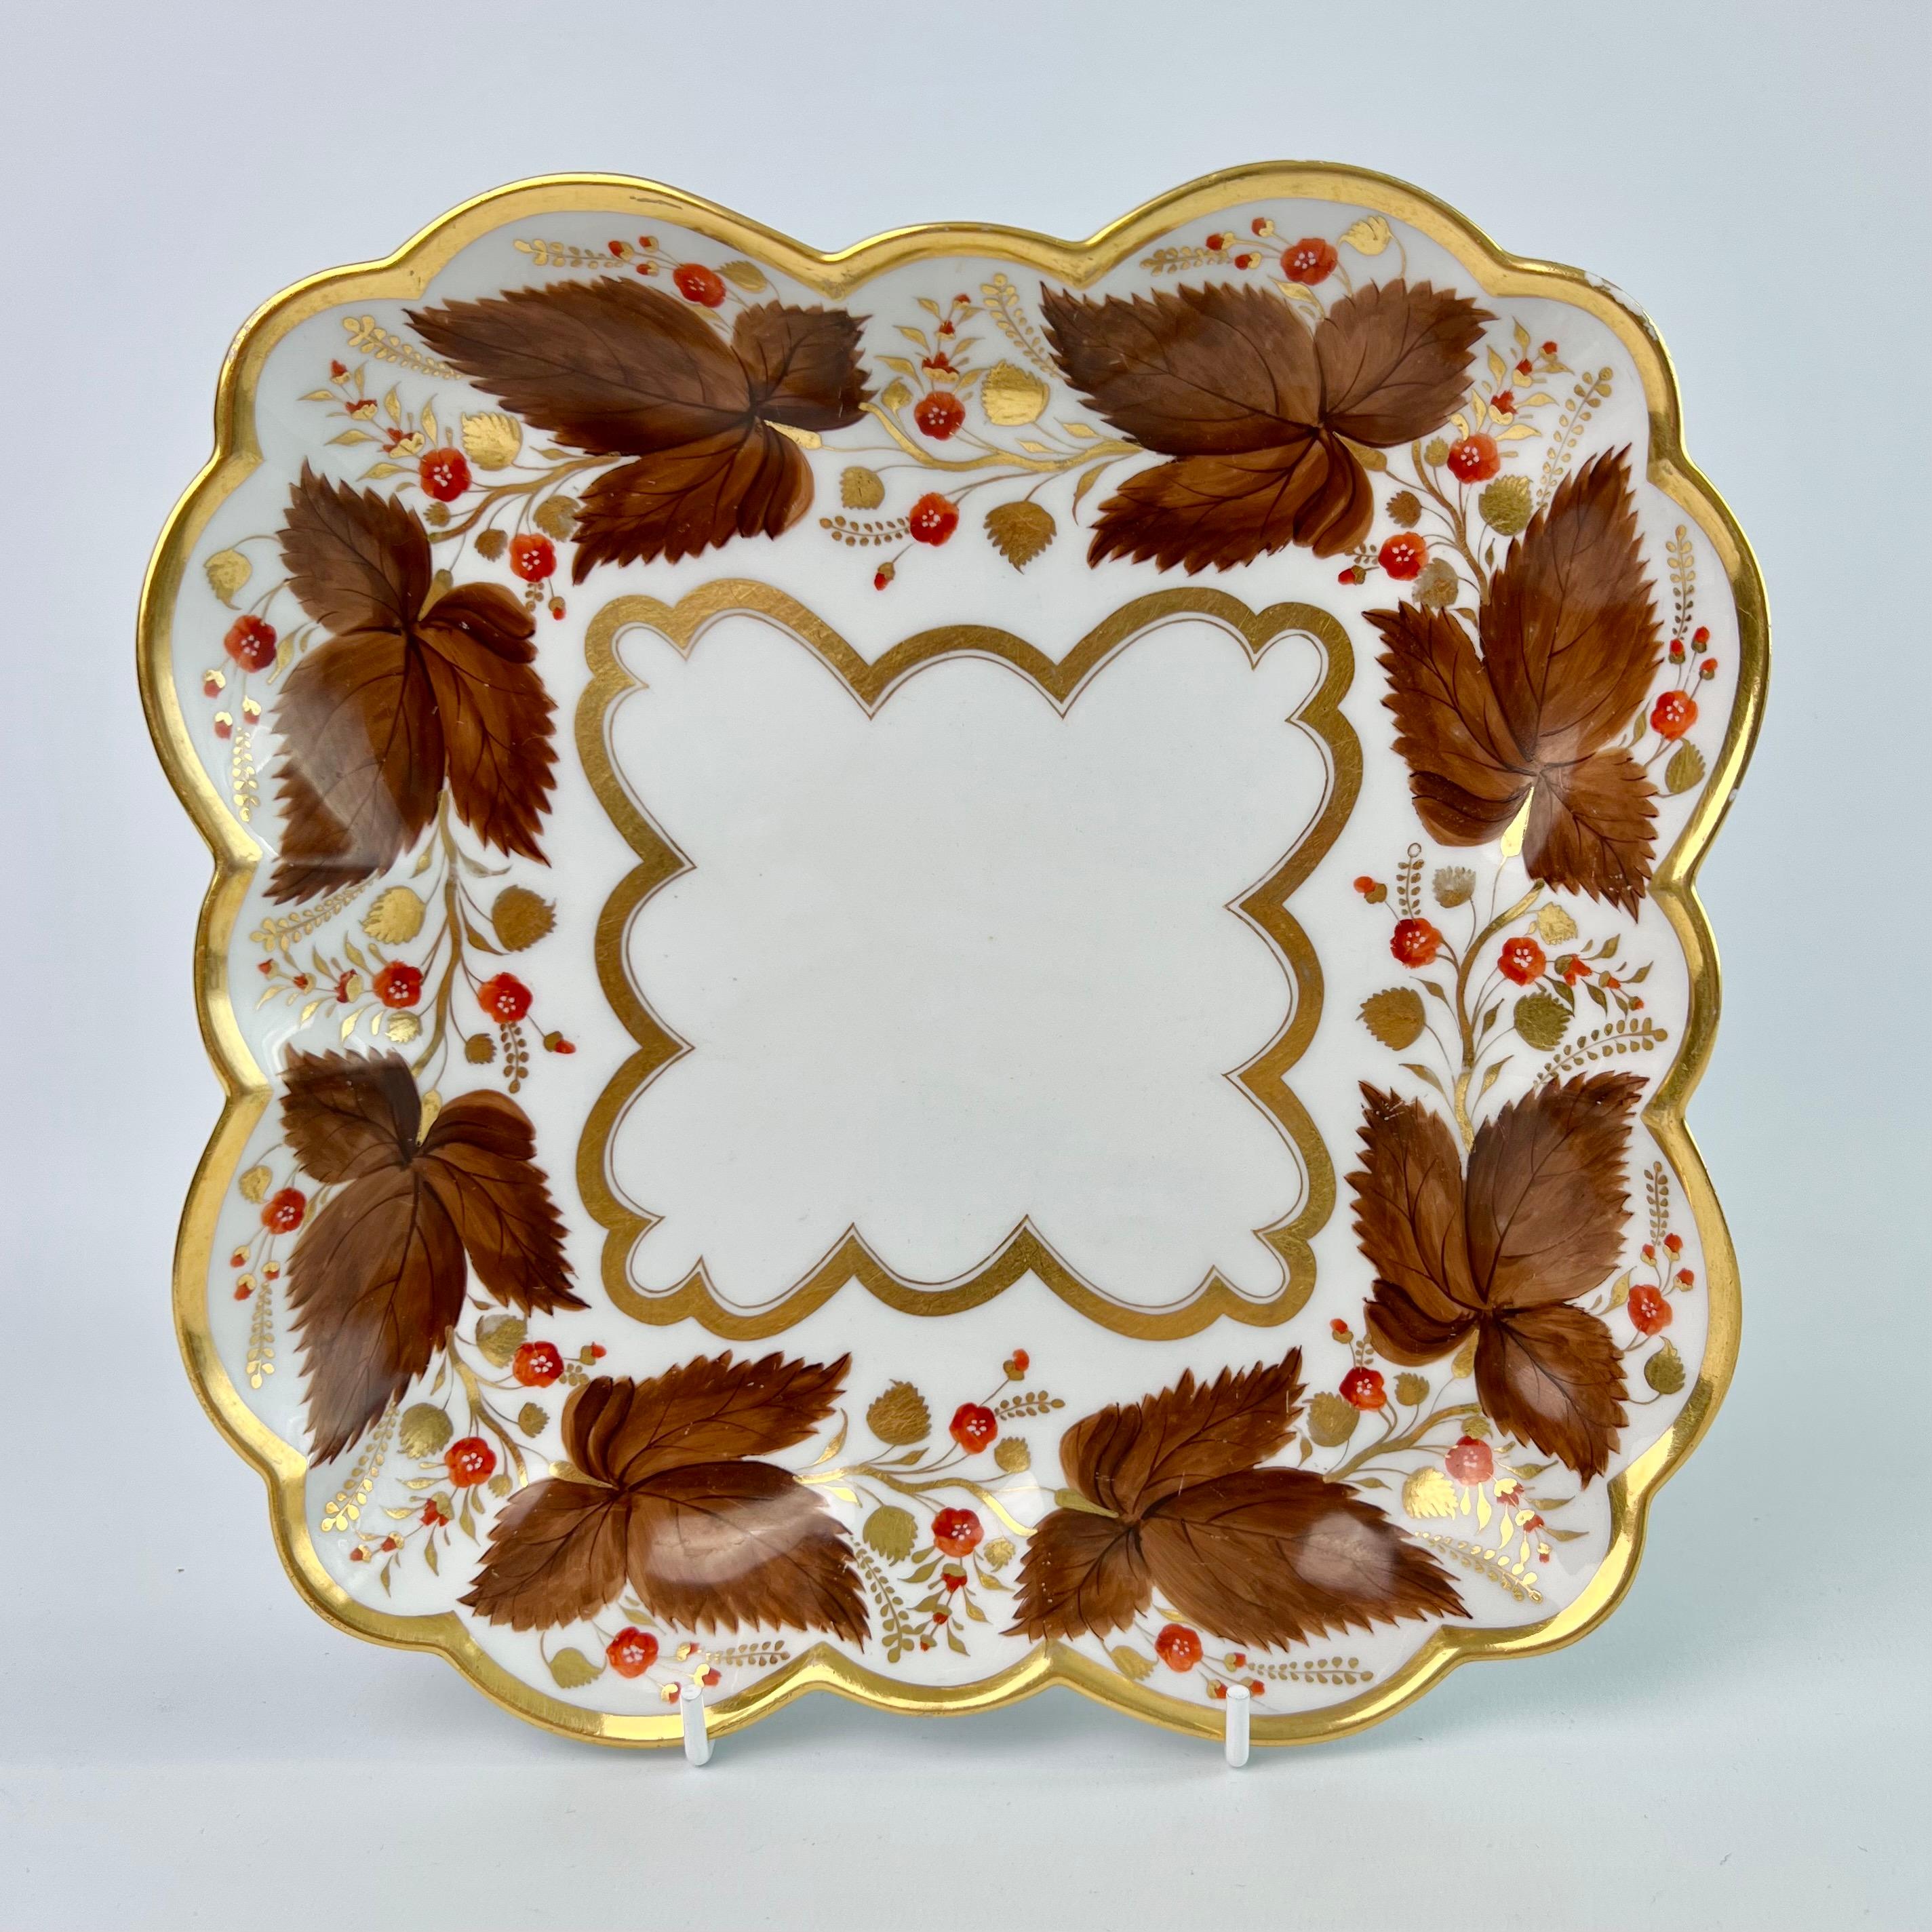 Flight Barr & Barr Dessert Service, Brown Vines and Berries, 1815-1820 In Good Condition For Sale In London, GB